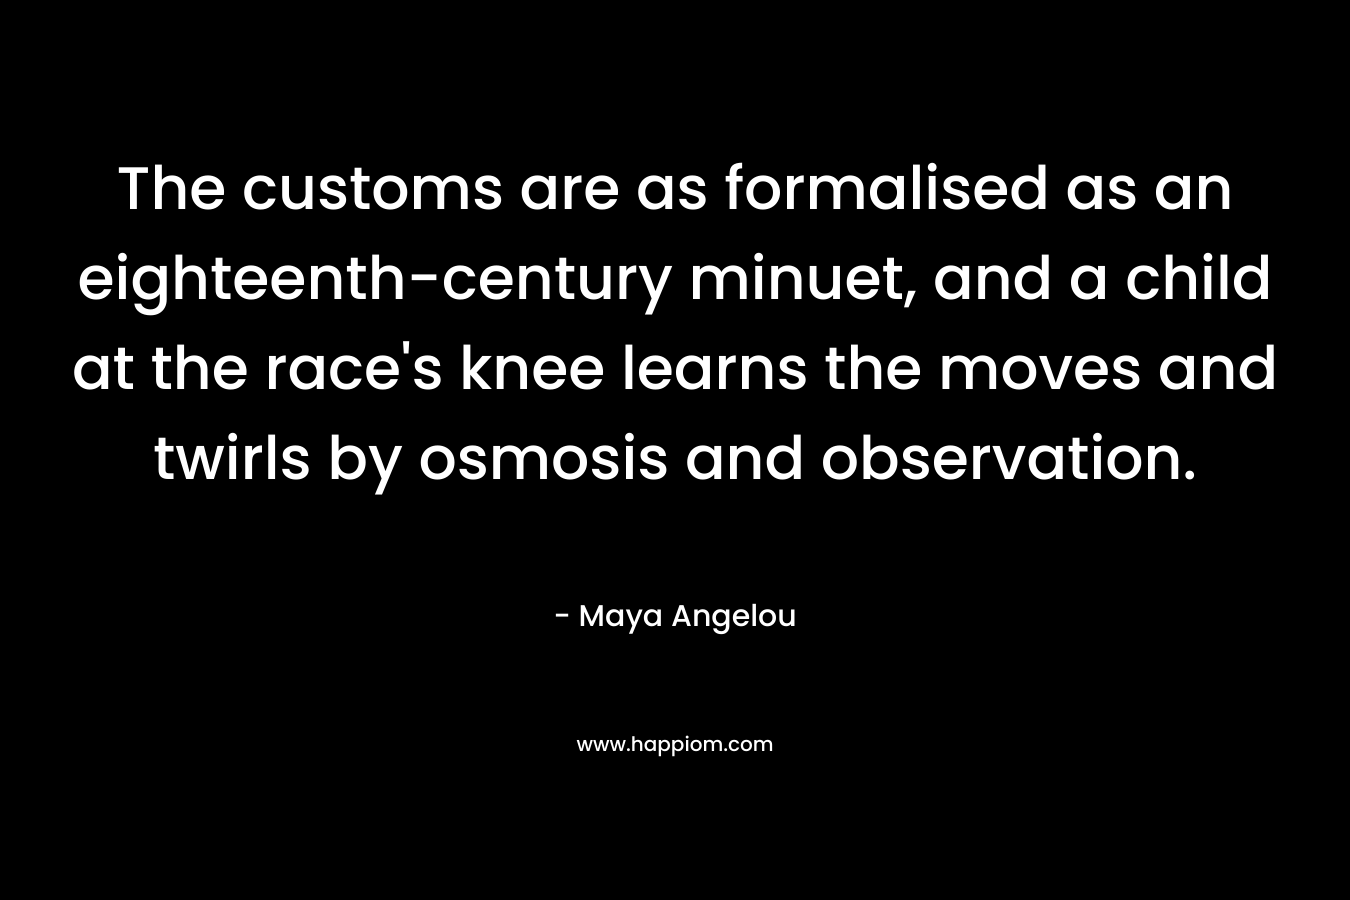 The customs are as formalised as an eighteenth-century minuet, and a child at the race’s knee learns the moves and twirls by osmosis and observation. – Maya Angelou